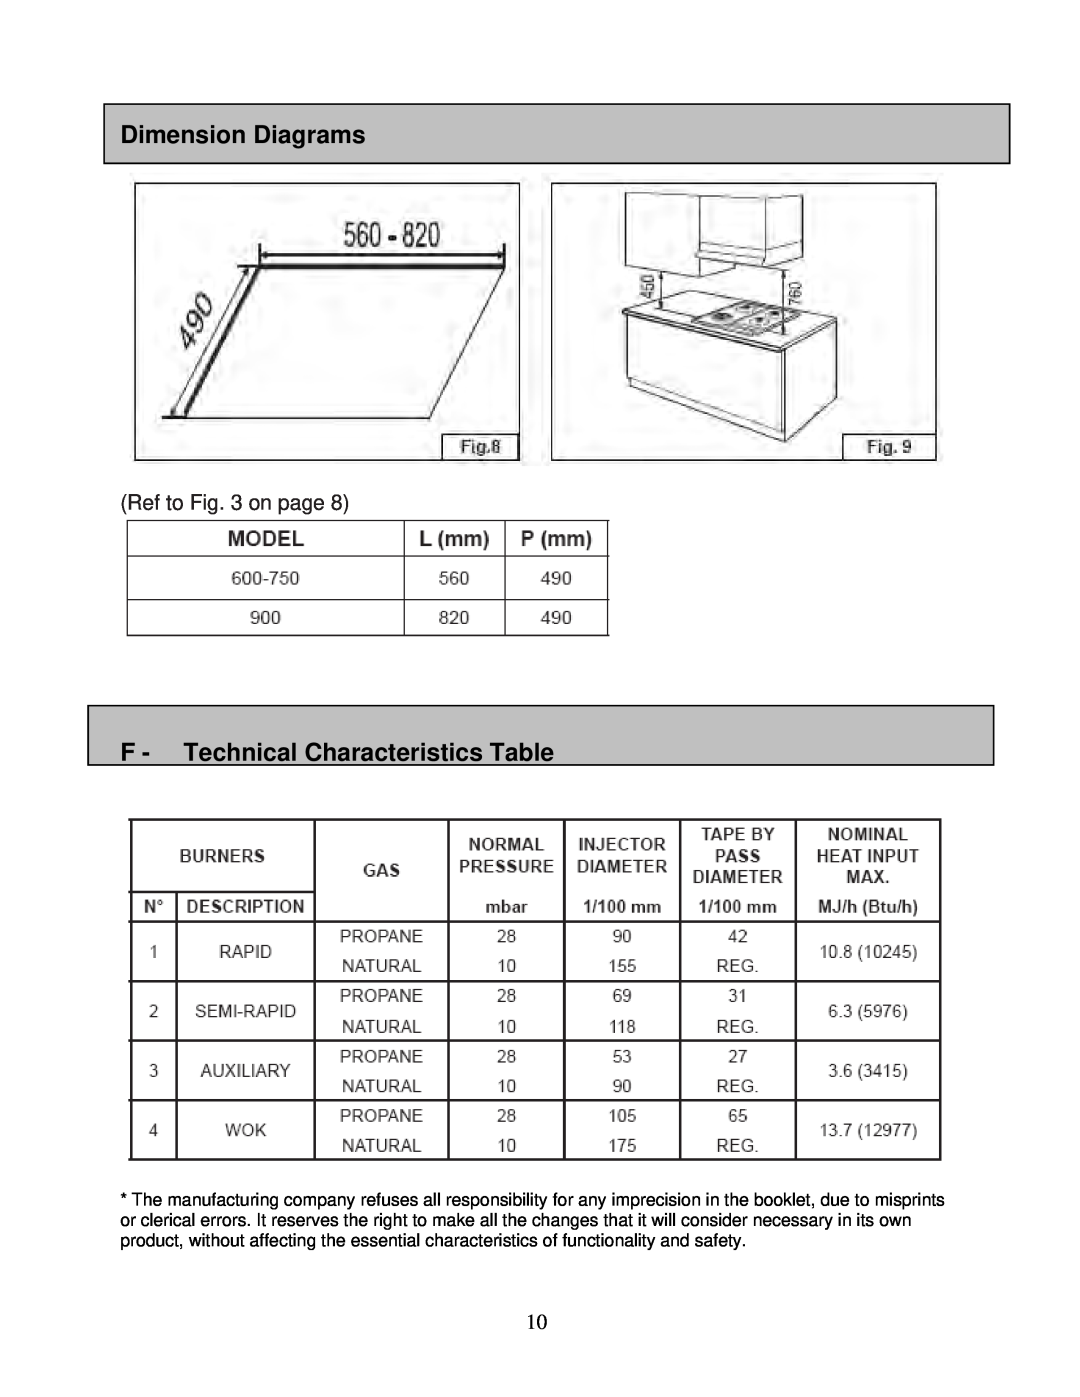 AEG 6524gm-m user manual Dimension Diagrams, F - Technical Characteristics Table, Ref to on page 